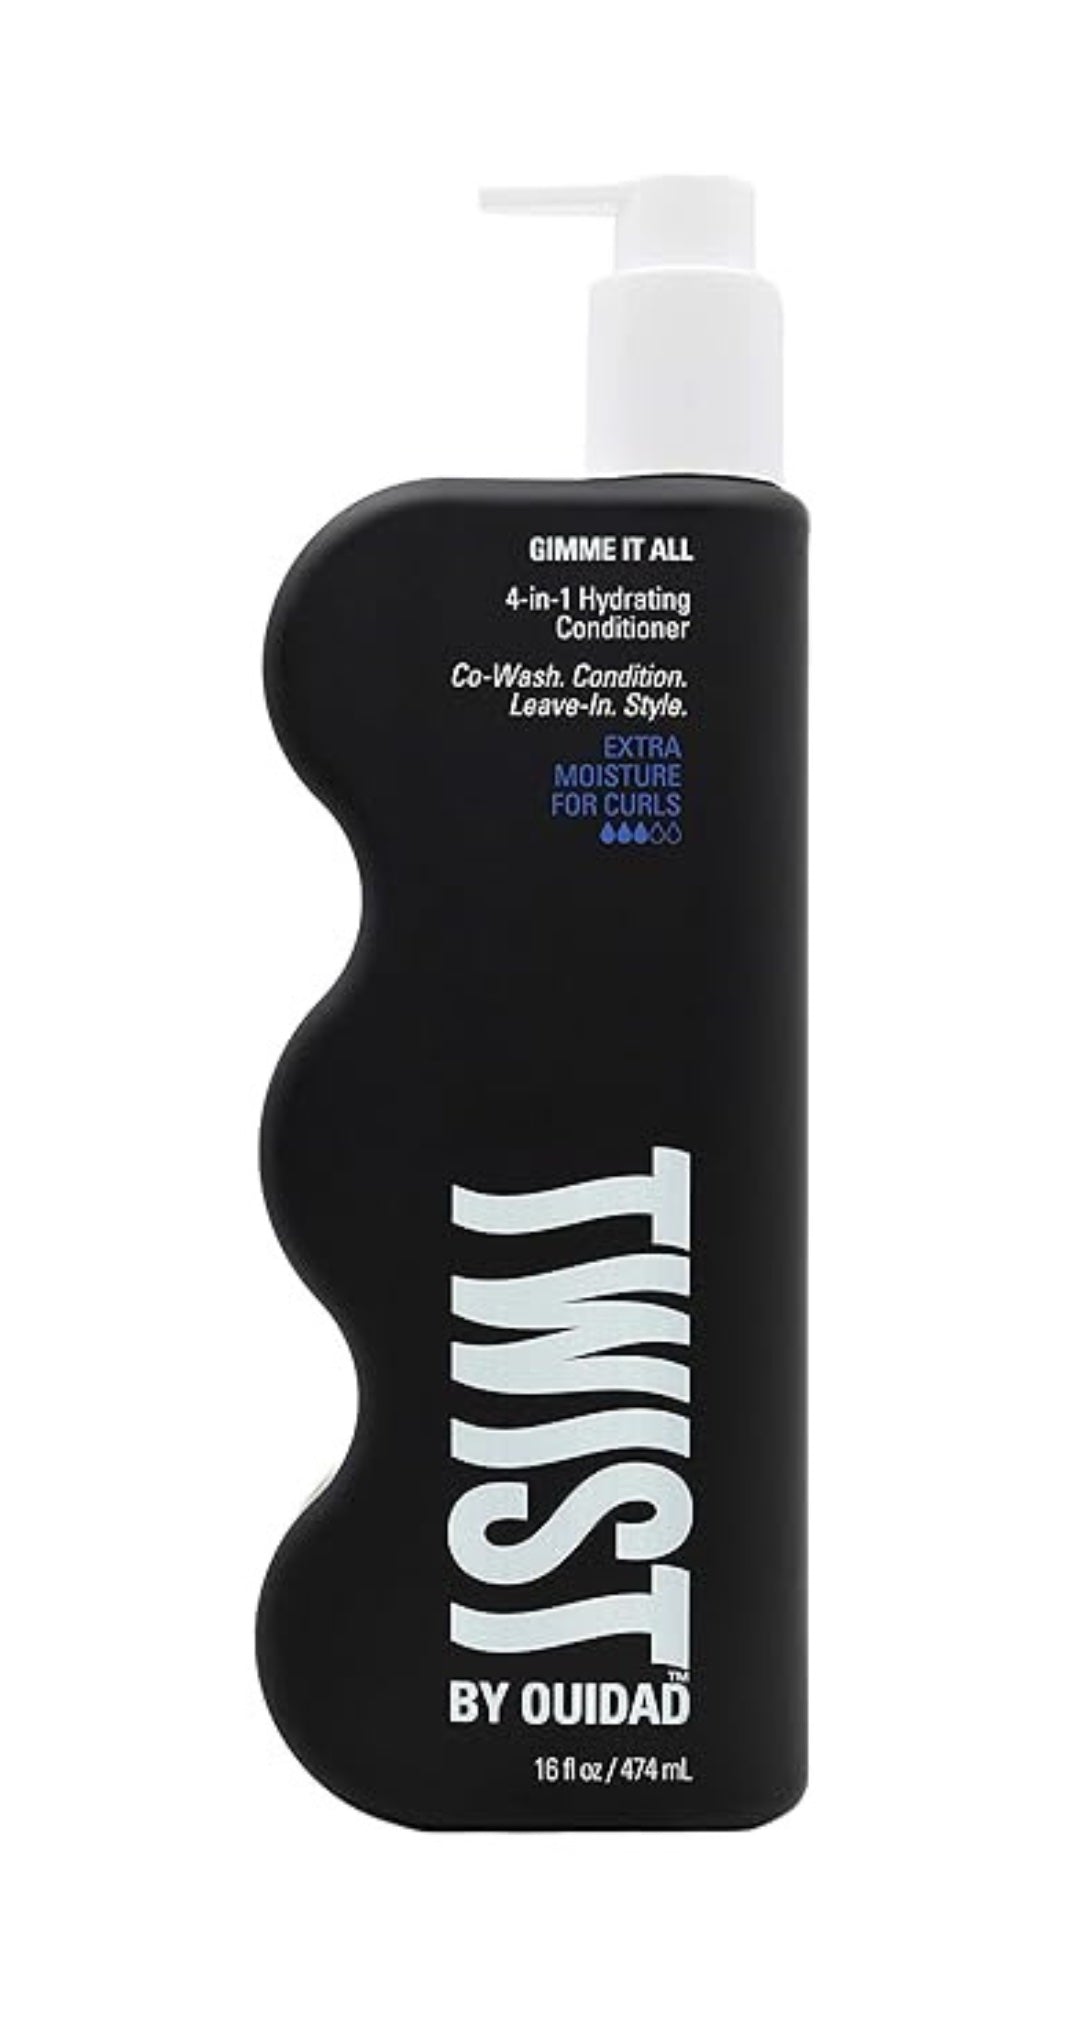 TWIST, BY OUIDID 4 in 1 hydrating conditioner